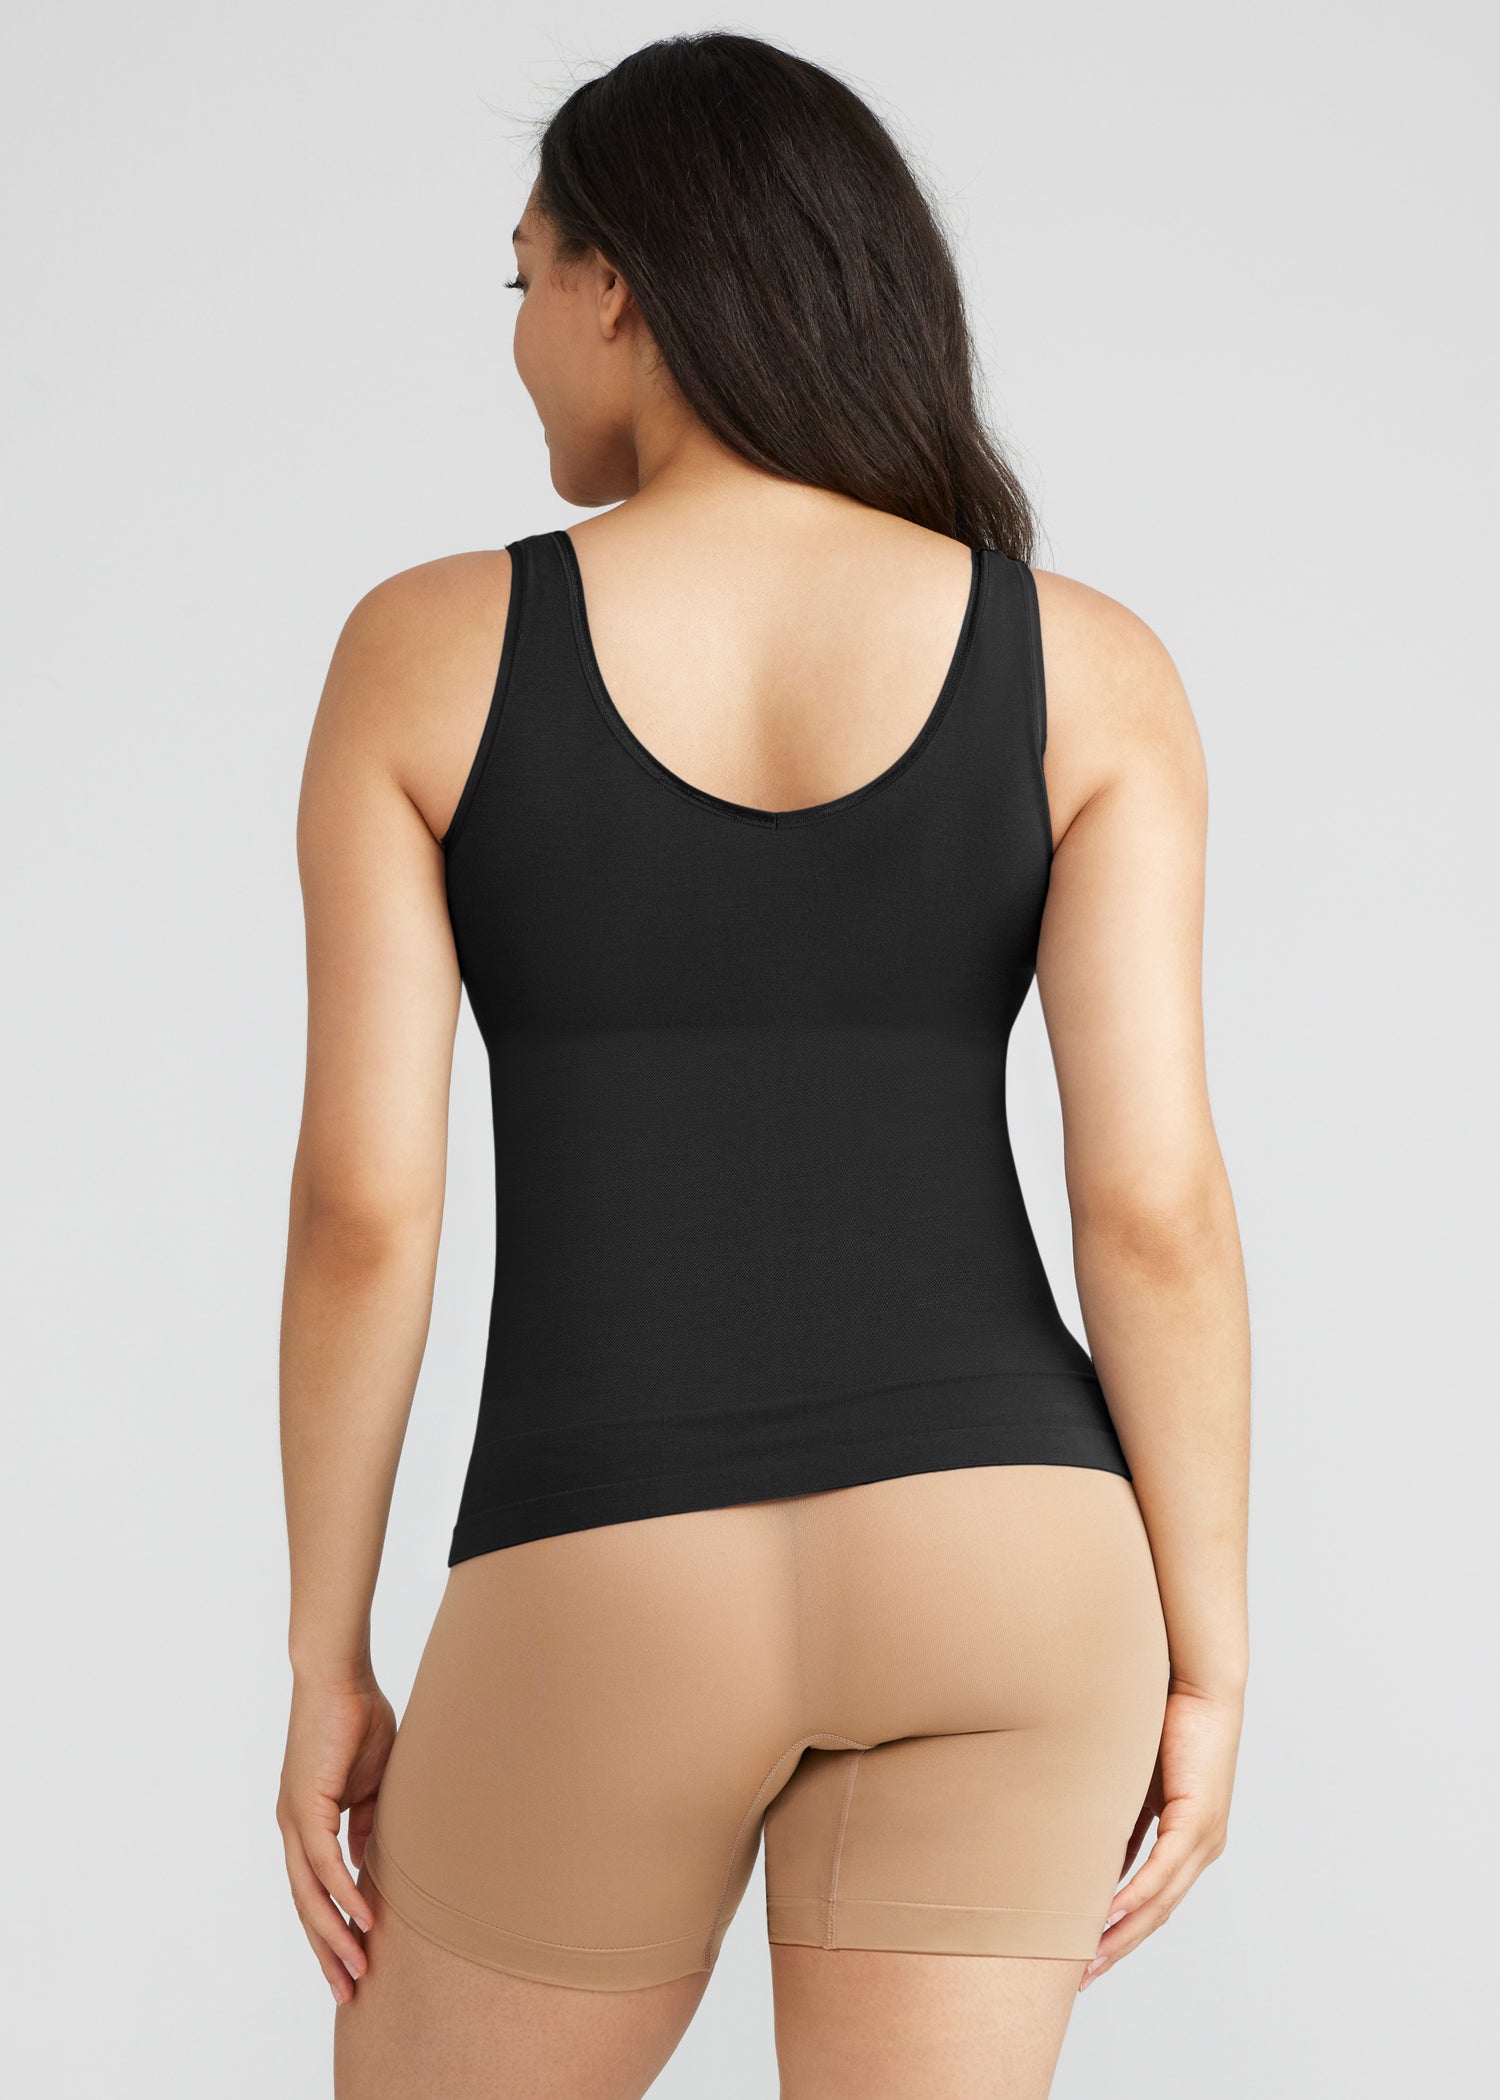 Clothing & Shoes - Tops - T-Shirts & Tops - Yummie® Seamless 2-Way